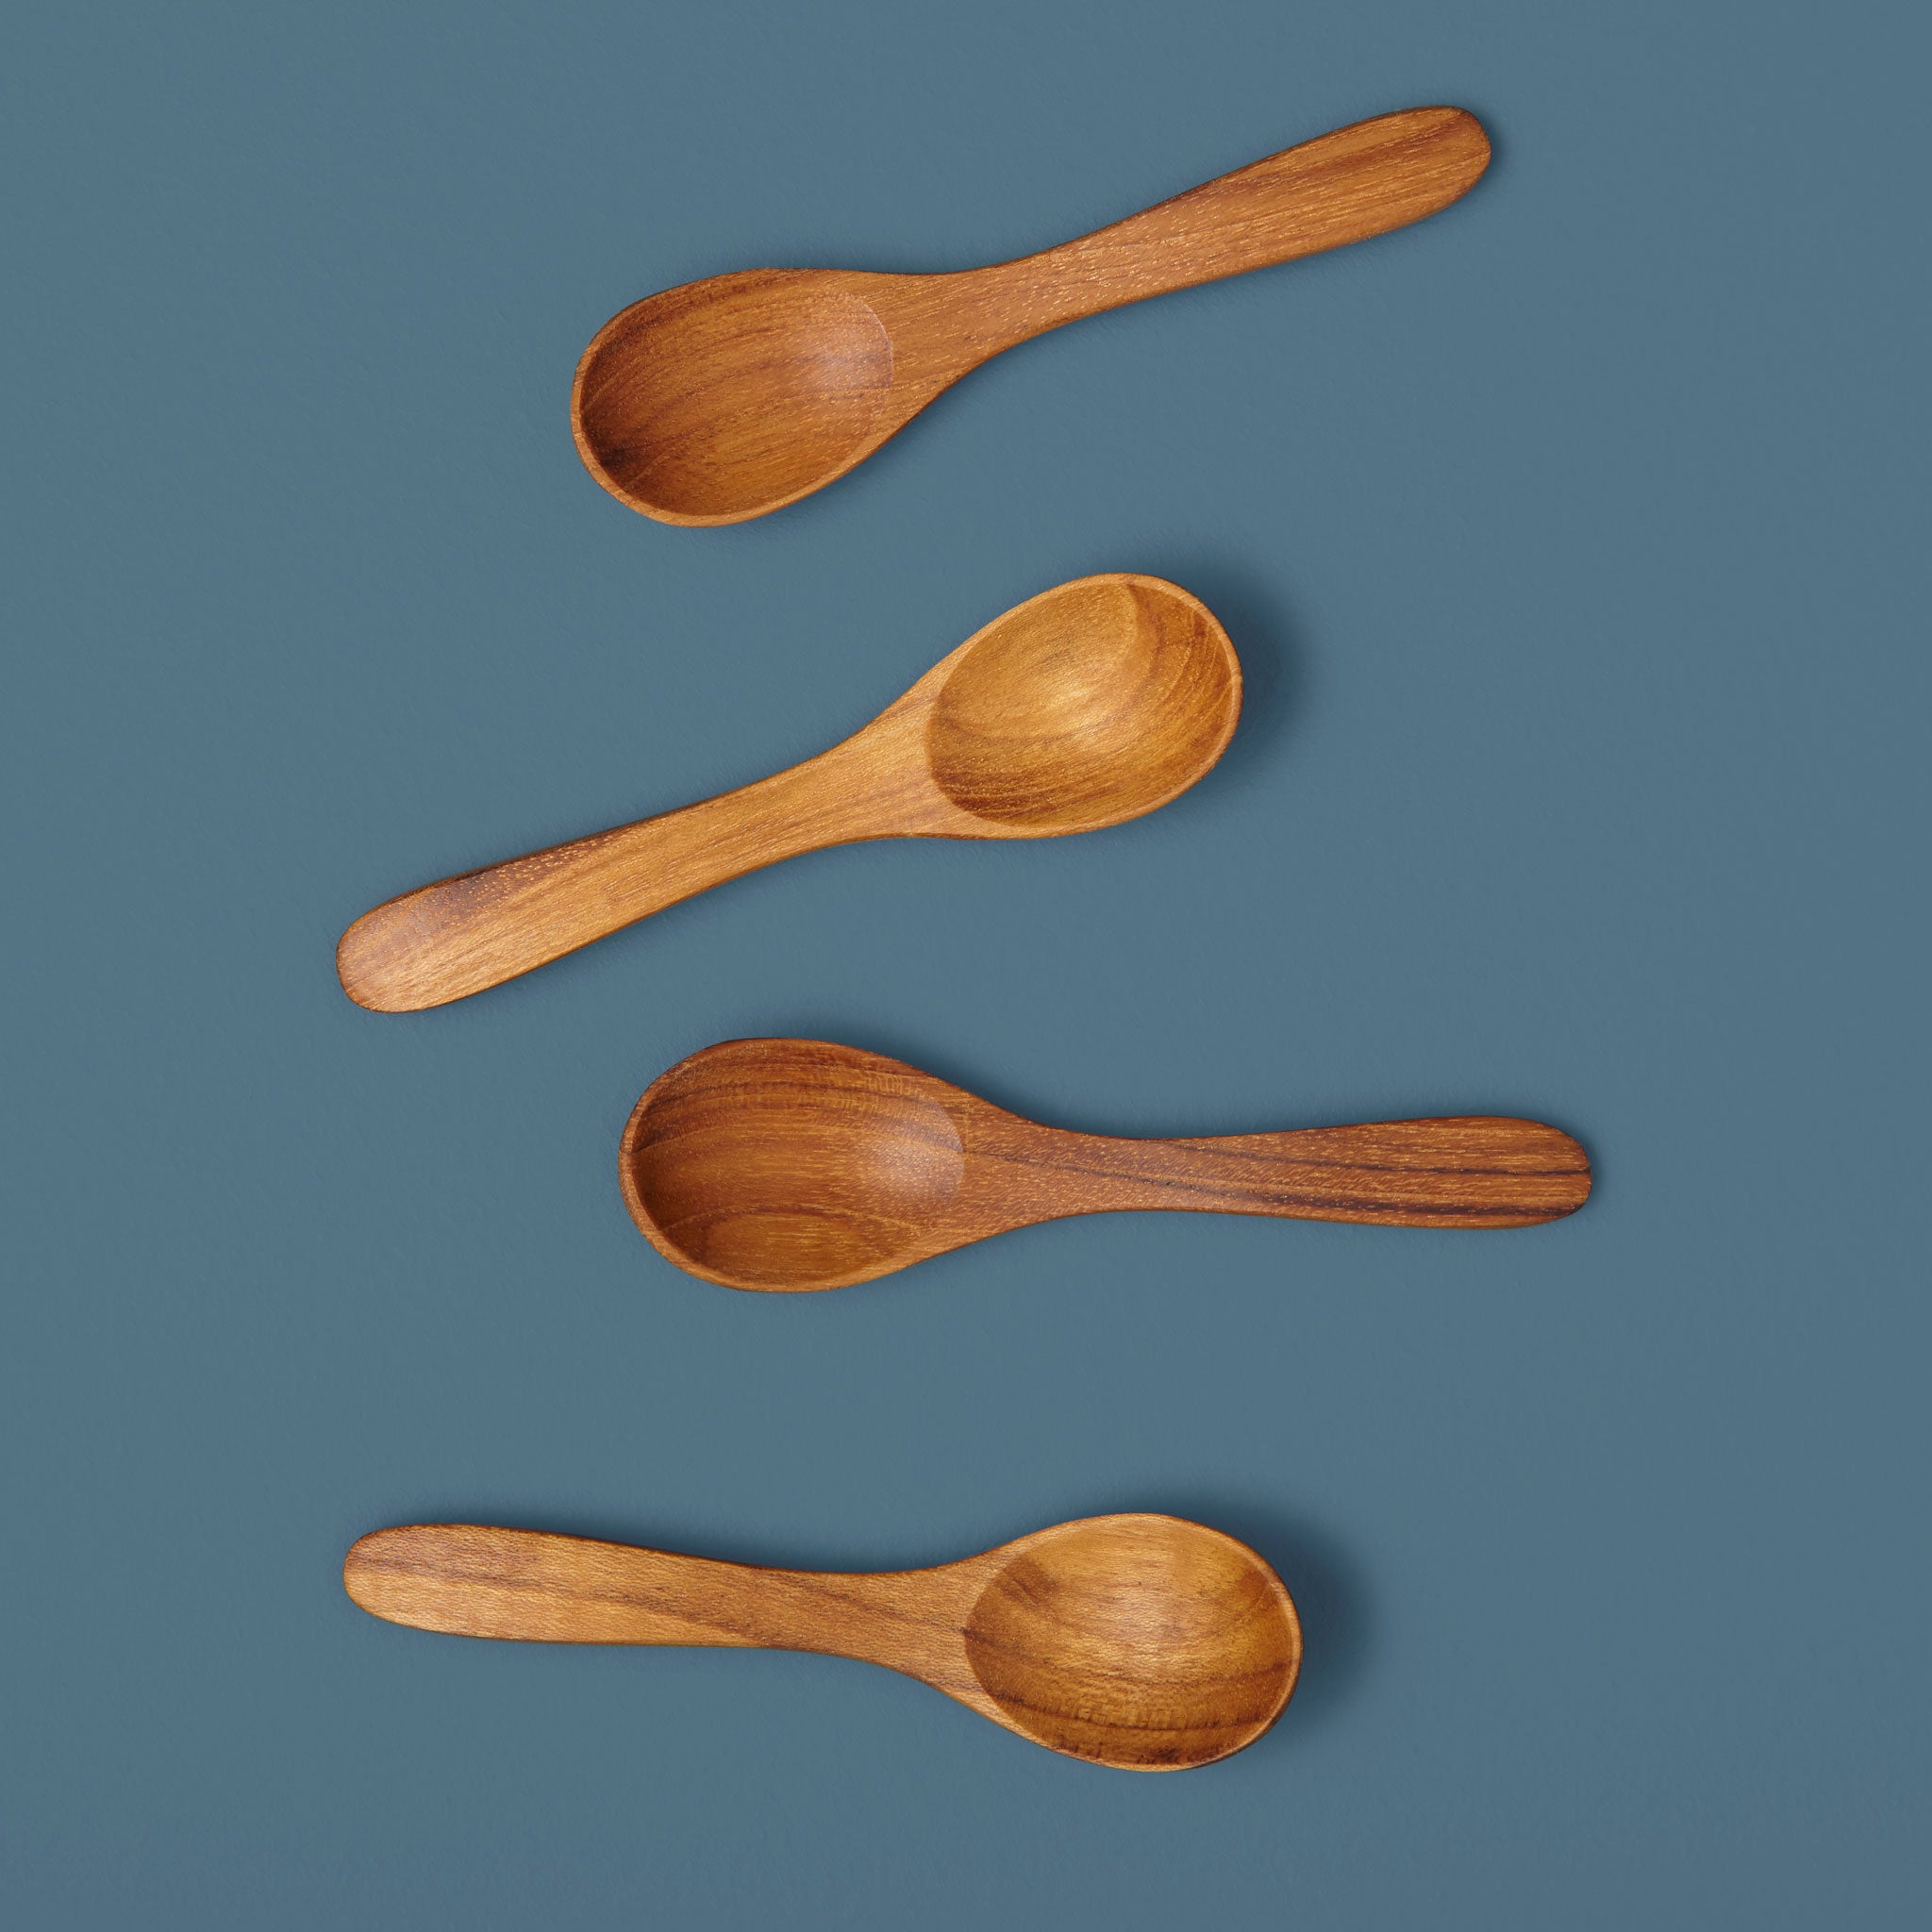 https://cdn.shopify.com/s/files/1/0623/8486/5521/products/Be-Home_Teak-Spoons-Small-Set-of-4_39-03.jpg?v=1650822403&width=2048